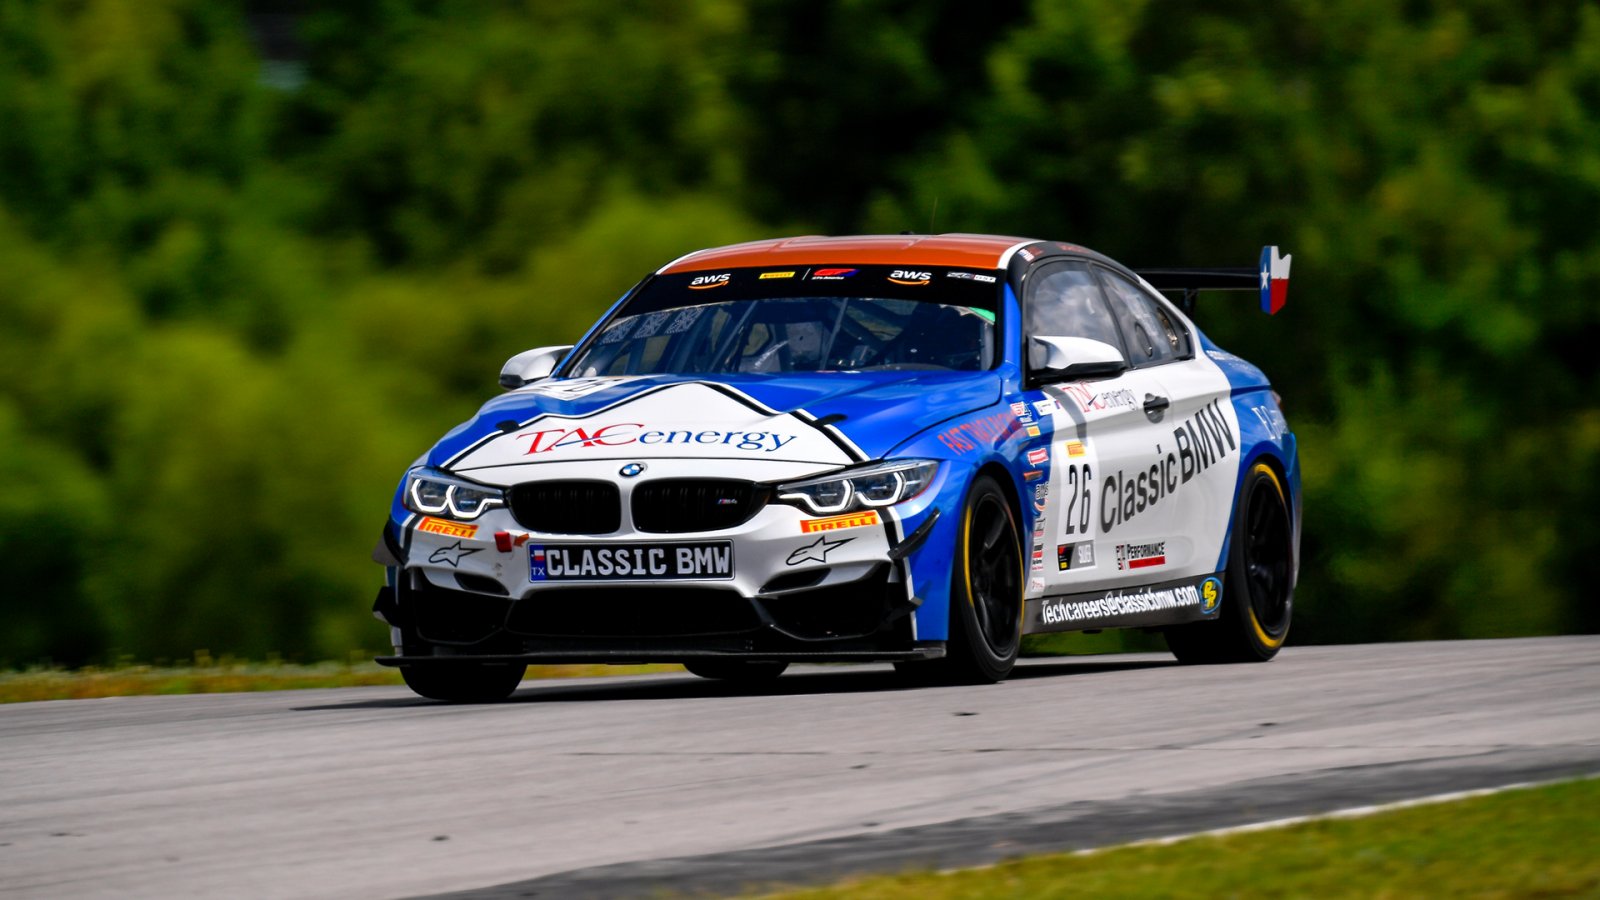 Fast Track Racing/Classic BMW Team Scores GT4 SprintX Win At VIR in SRO America Tripleheader Sports Car Competition